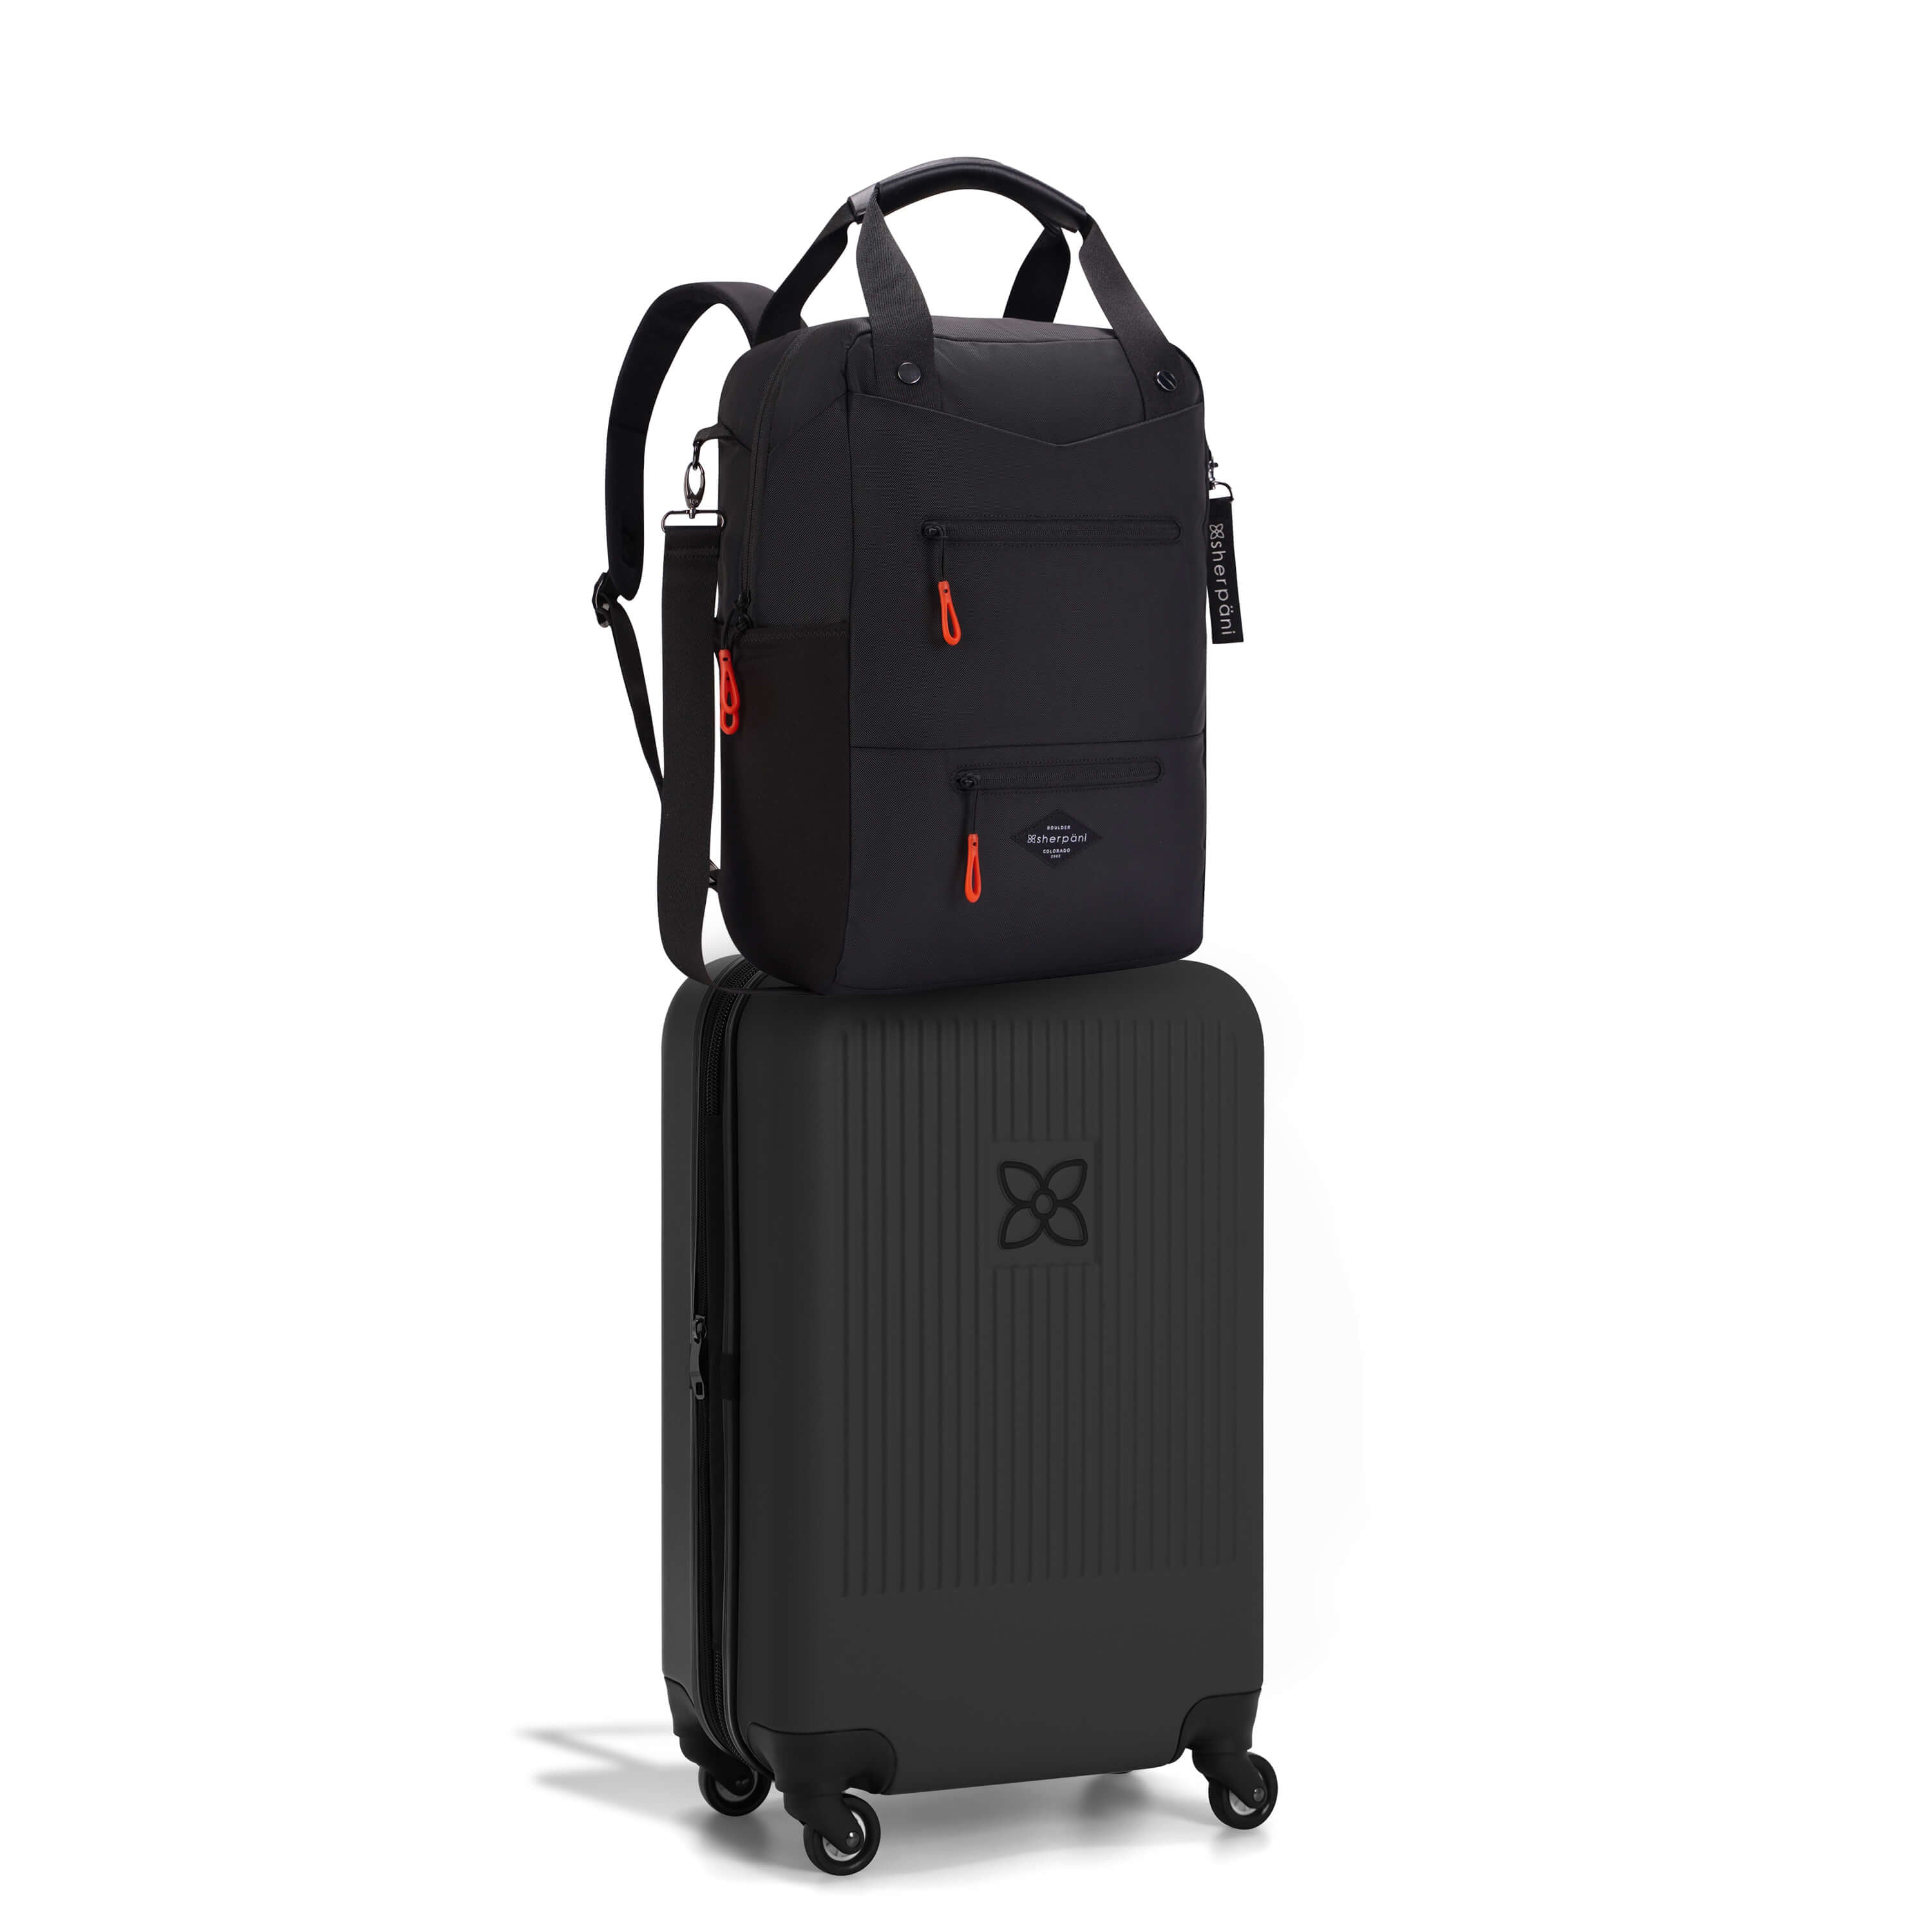 Sherpani travel Carry on Bundle in Classic Black. Hard shell luggage the Meridian and convertible travel bag the Camden bundled together at a discounted rate. #color_classic black